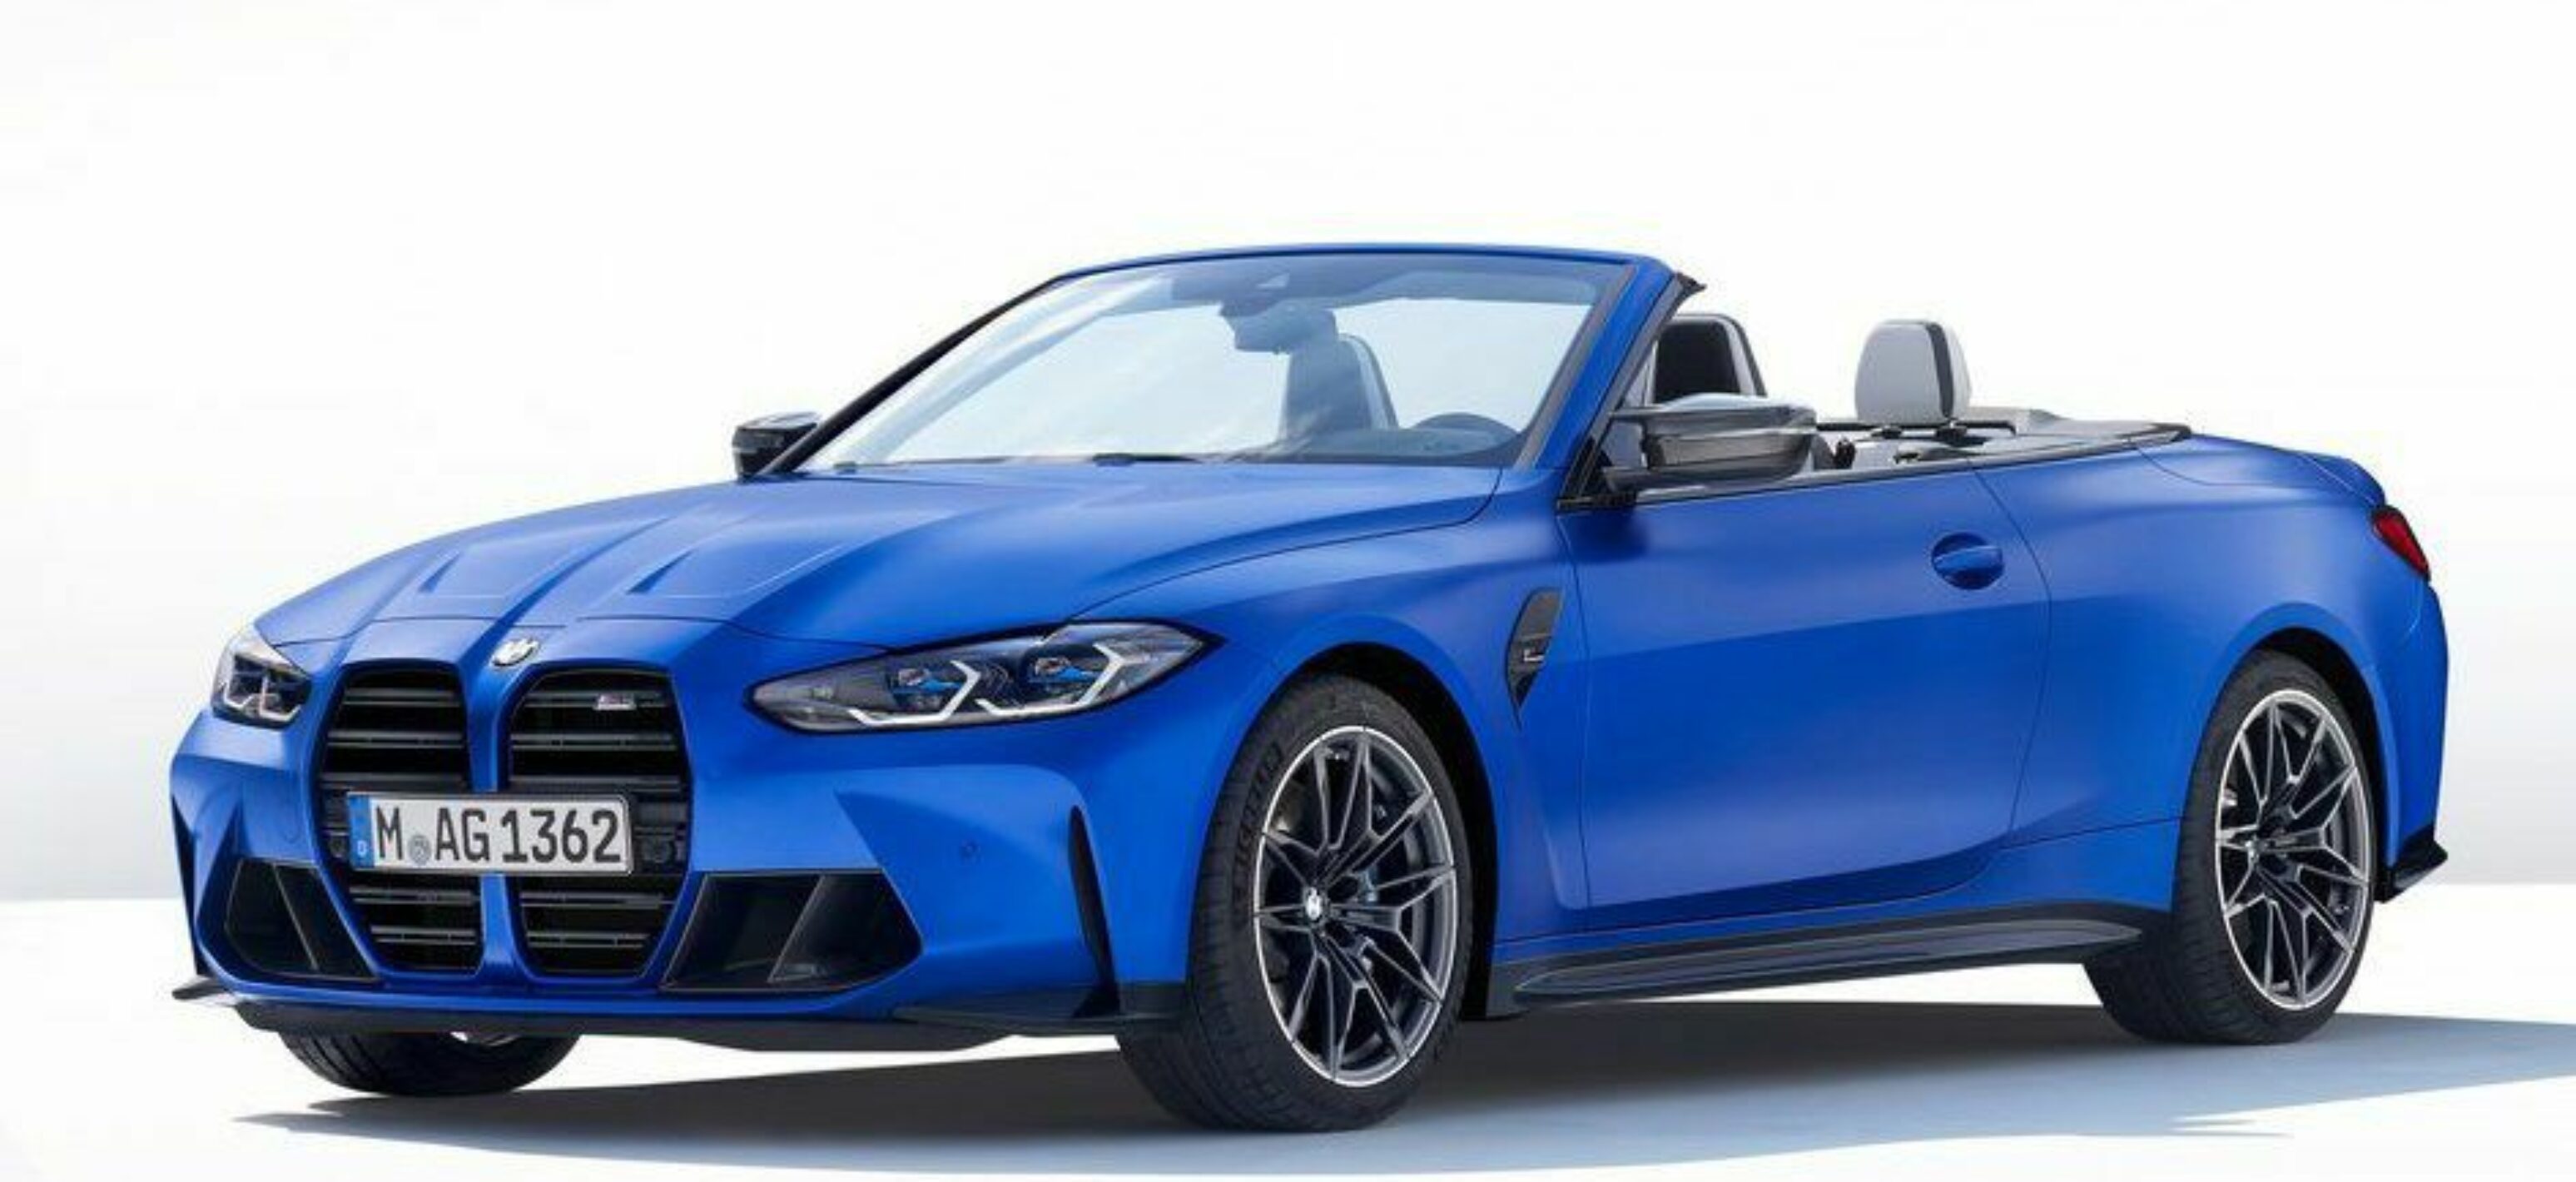 https://autofilter.sk/assets/images/m4-coupe-2/gallery/bmw-m4-competition-cabriolet-xdrive-2022_12-galeria.jpg - obrazok